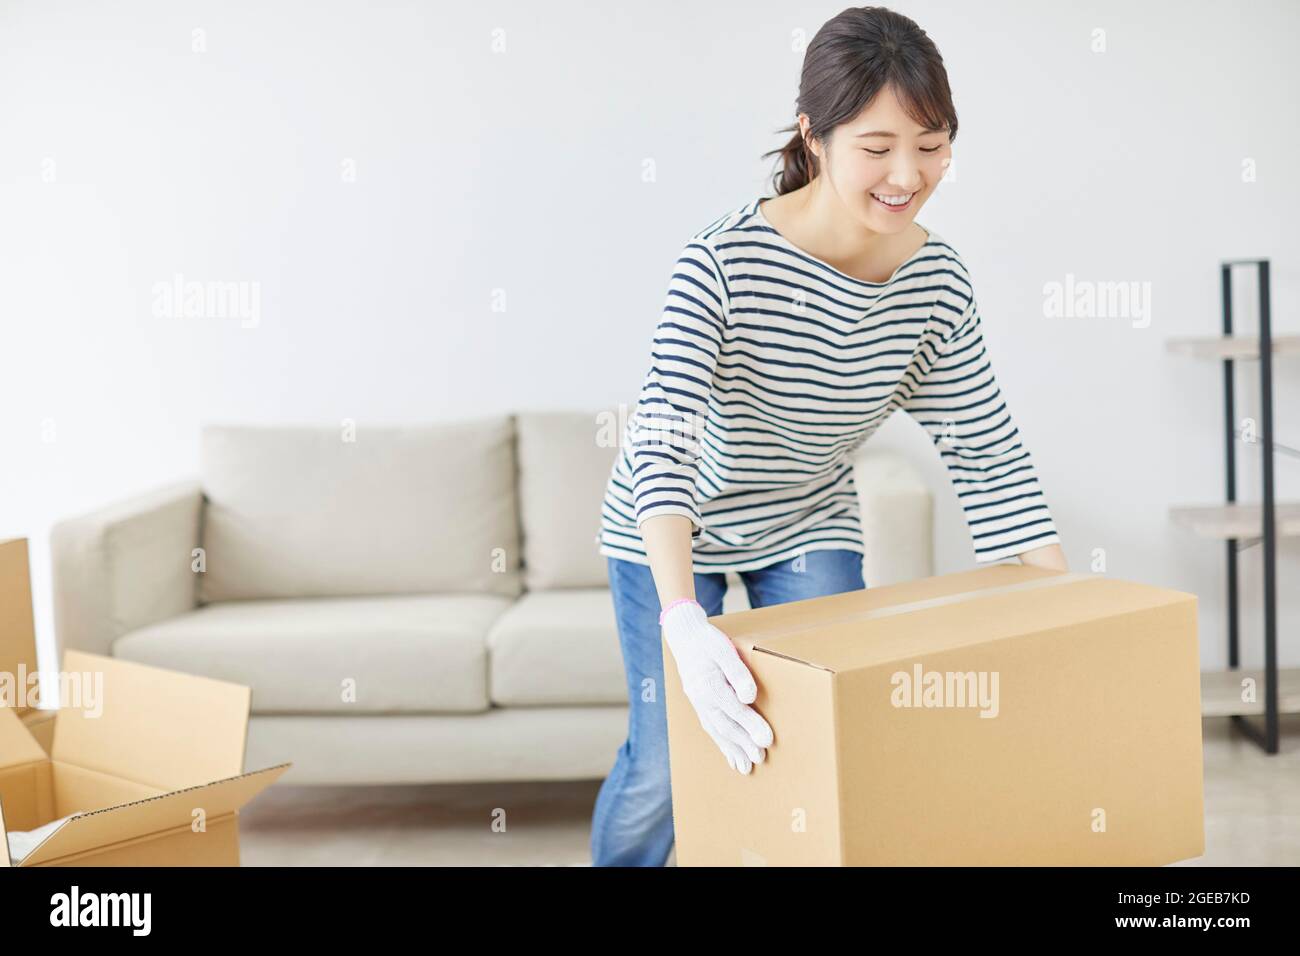 Japanese woman relocating Stock Photo